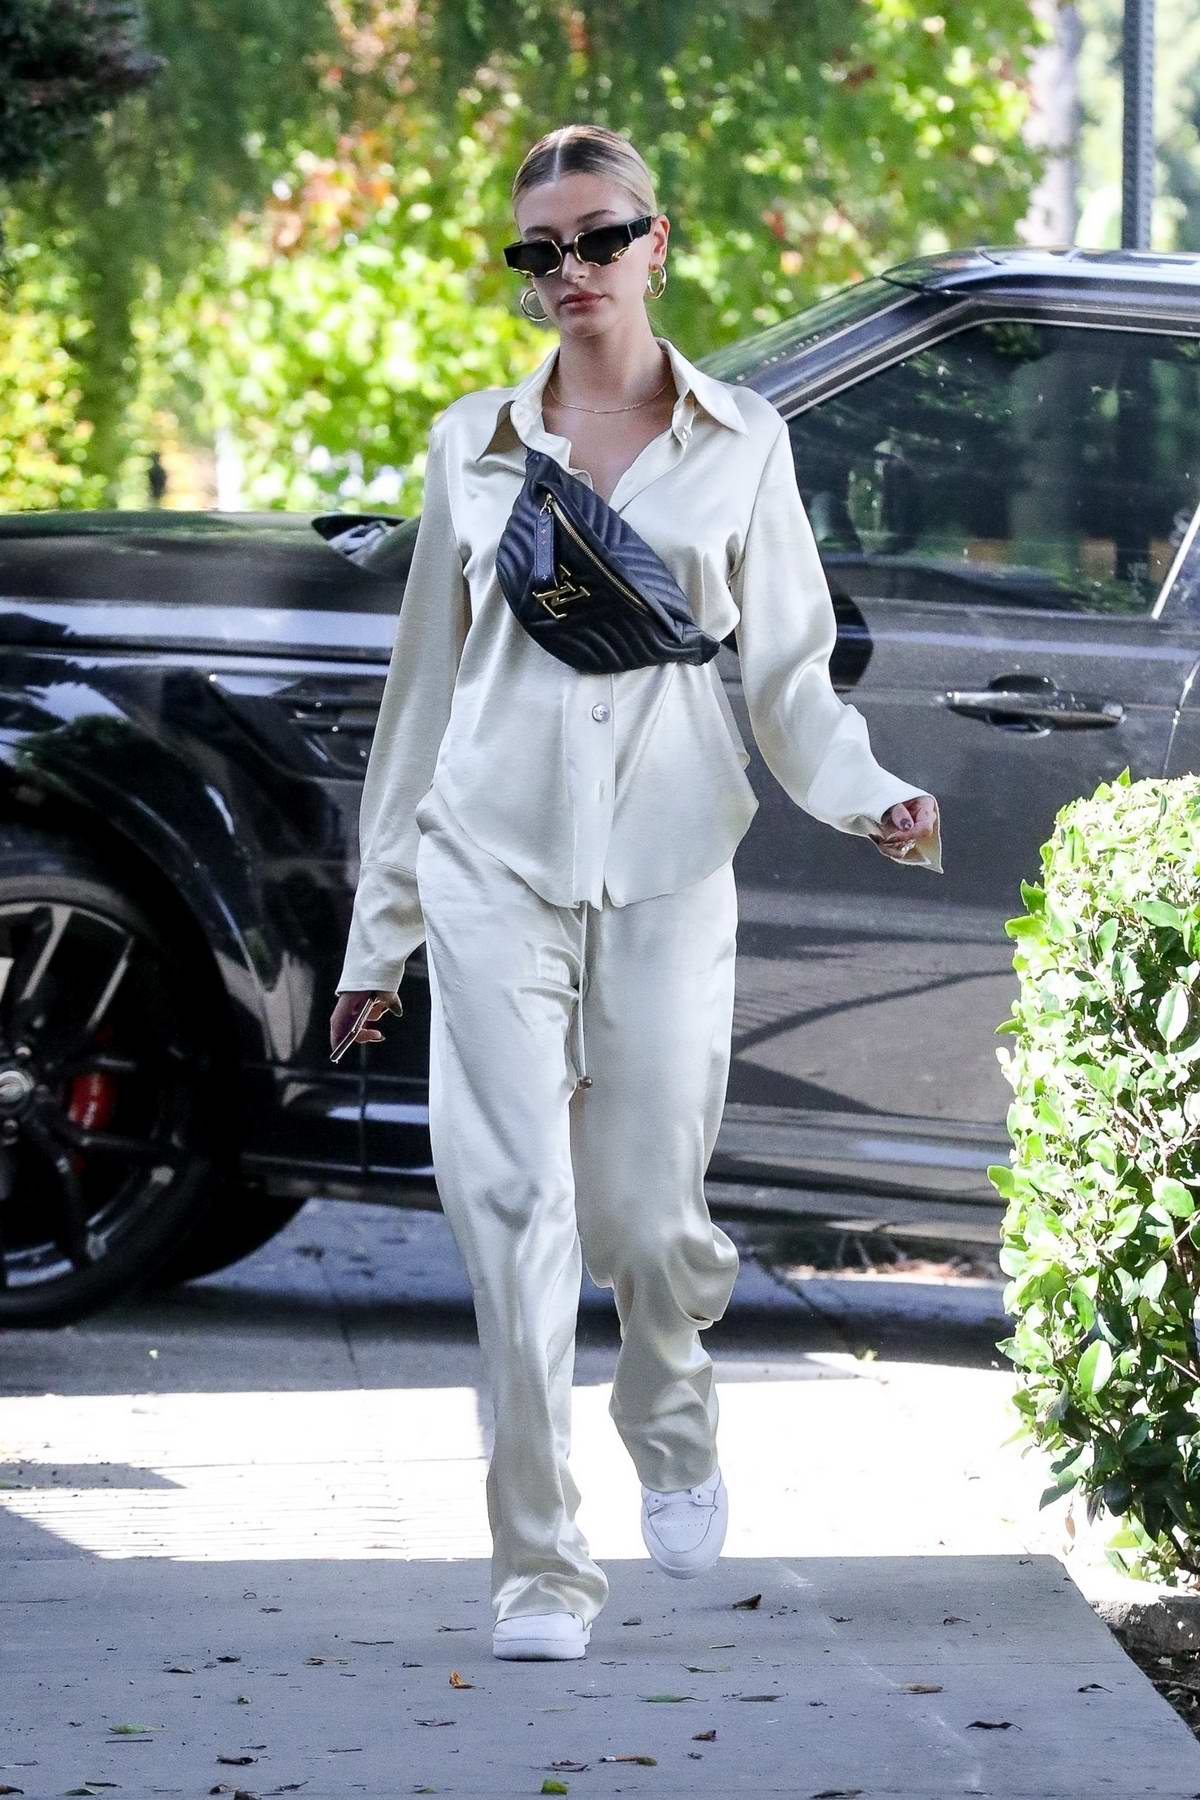 Hailey Bieber looks casual chic in a silk outfit while out running